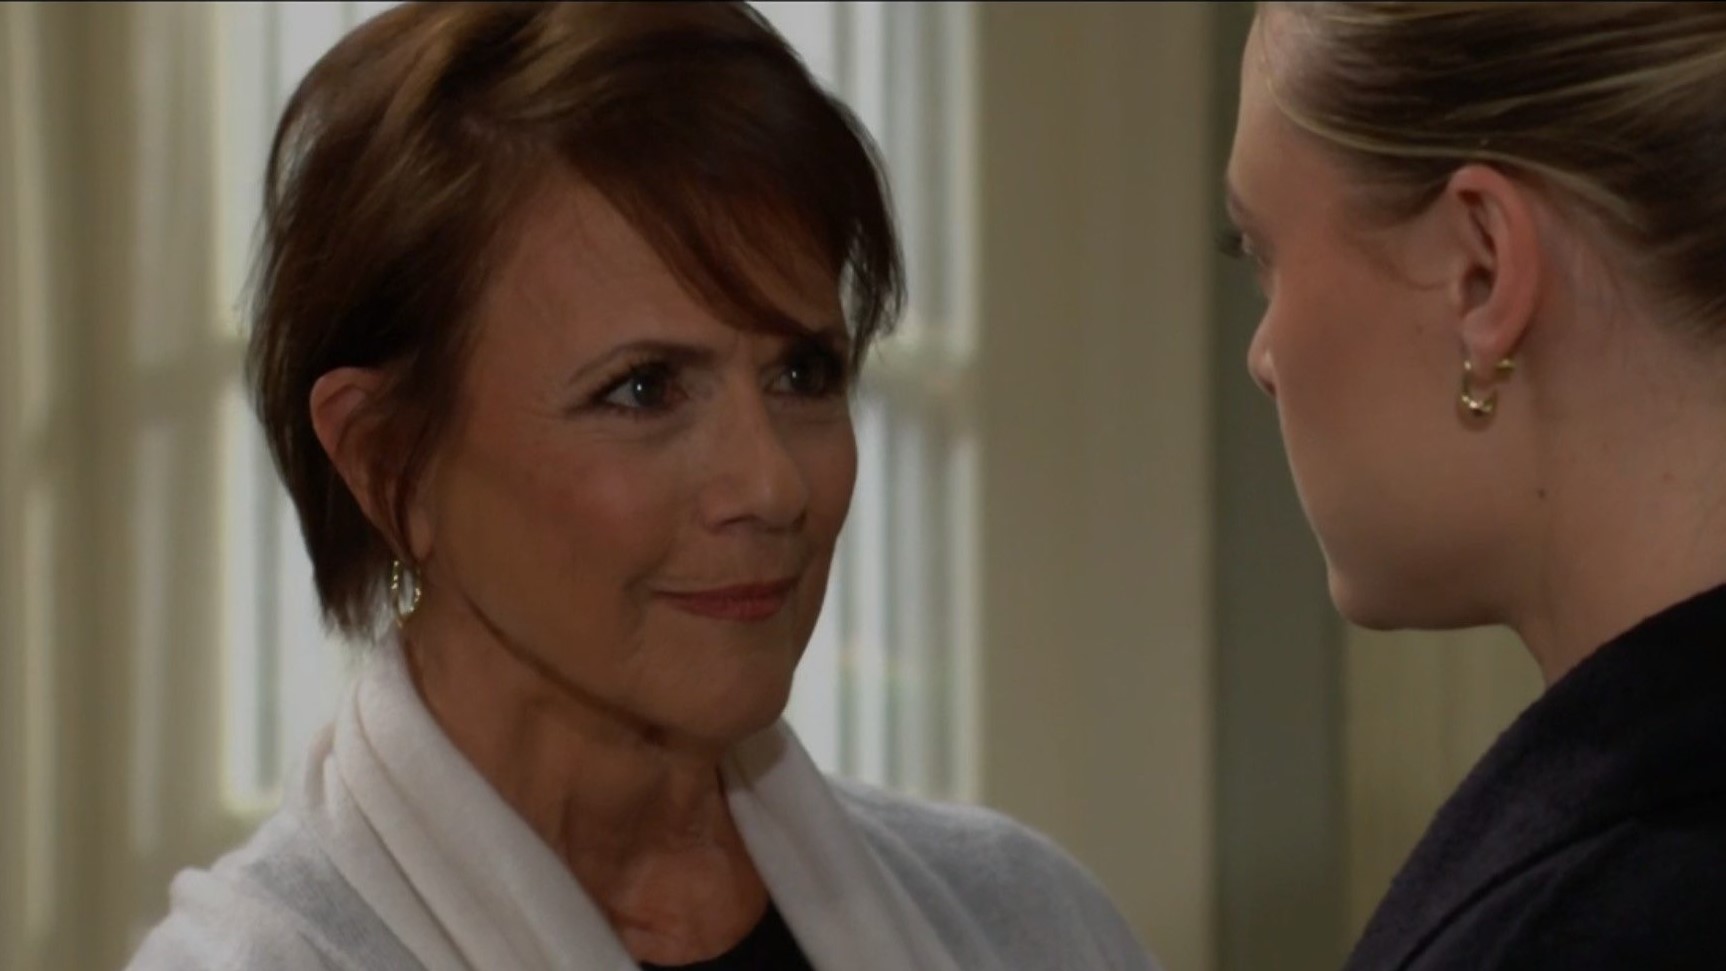 The Young and the Restless: Aunt Jordan related to Nikki? | What to Watch